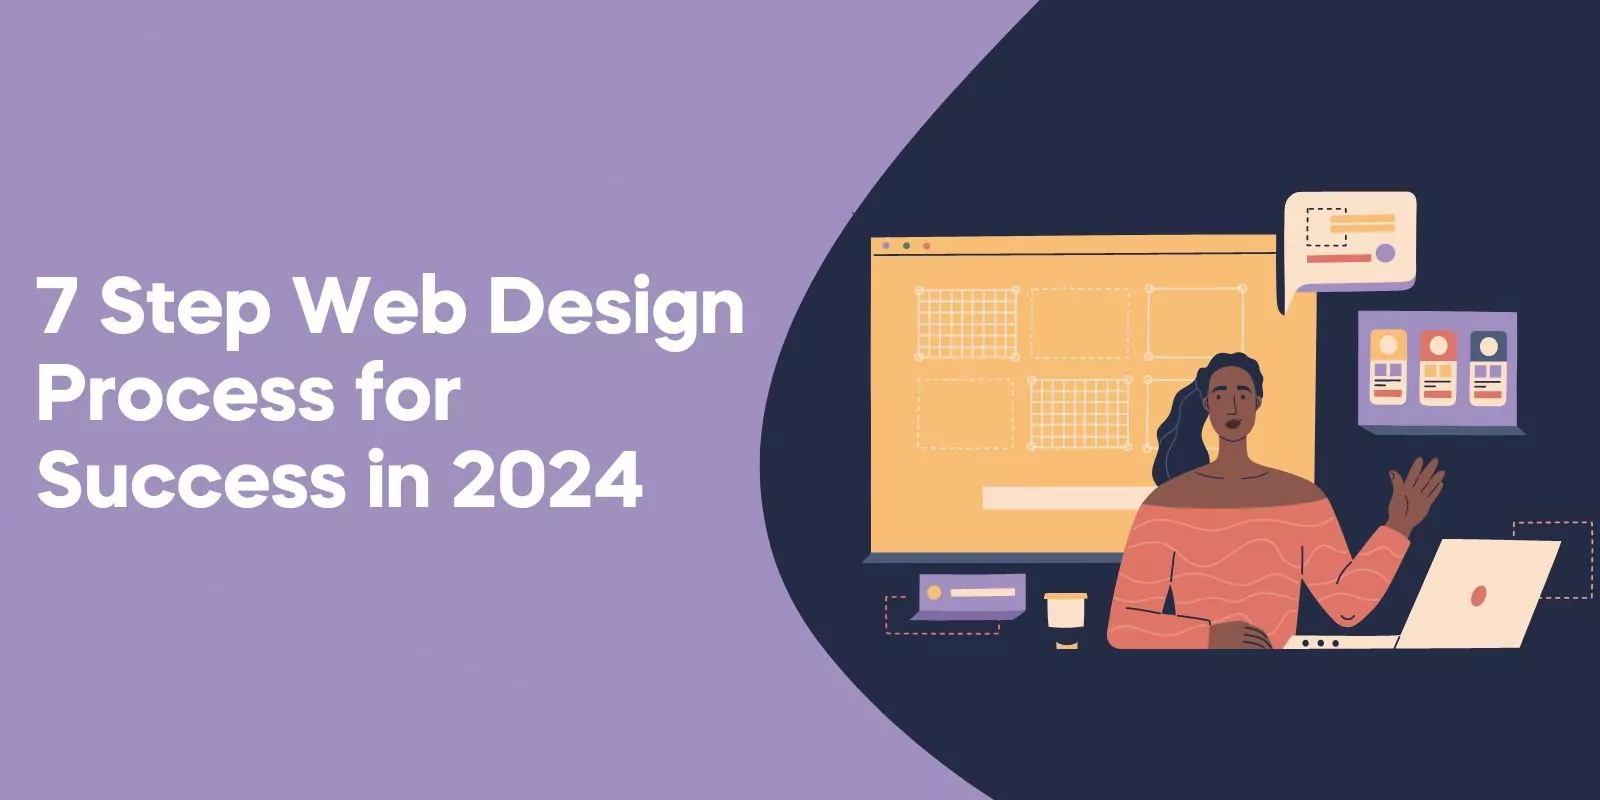 7 Step Web Design Process for Success in 2024